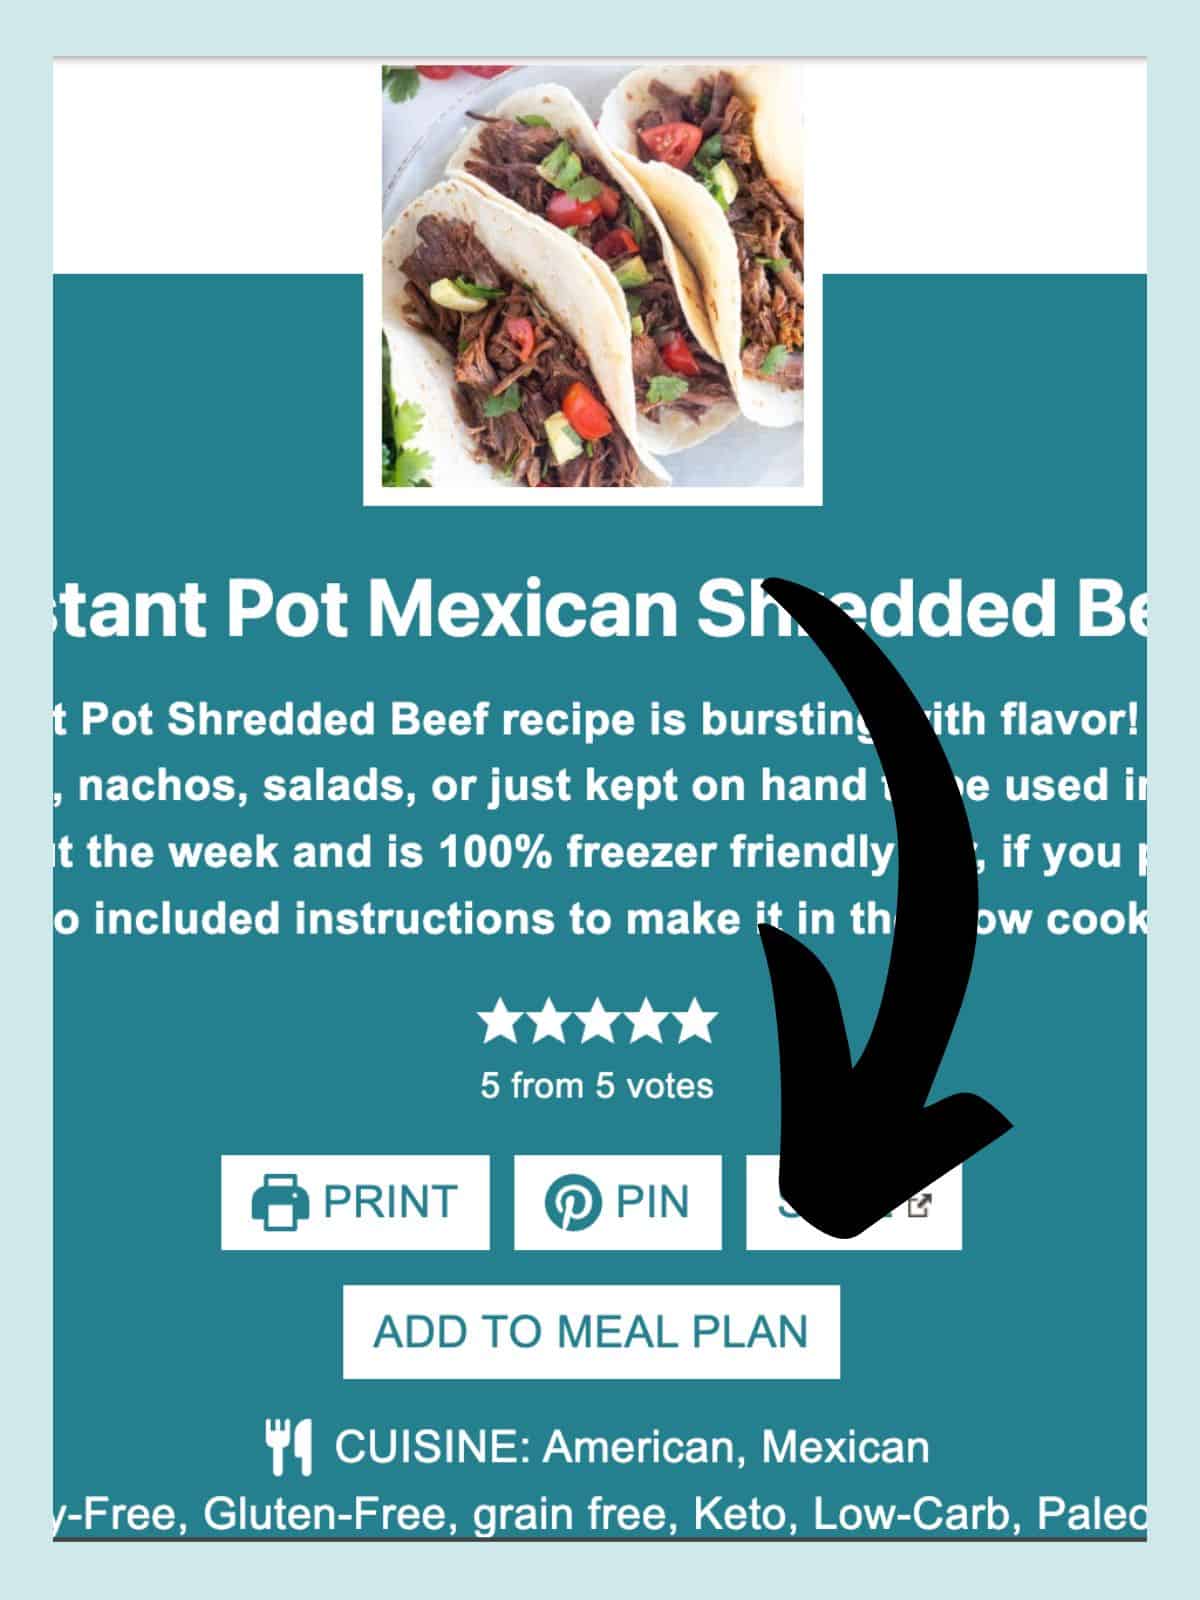 arrow pointing to the text "add to meal plan"